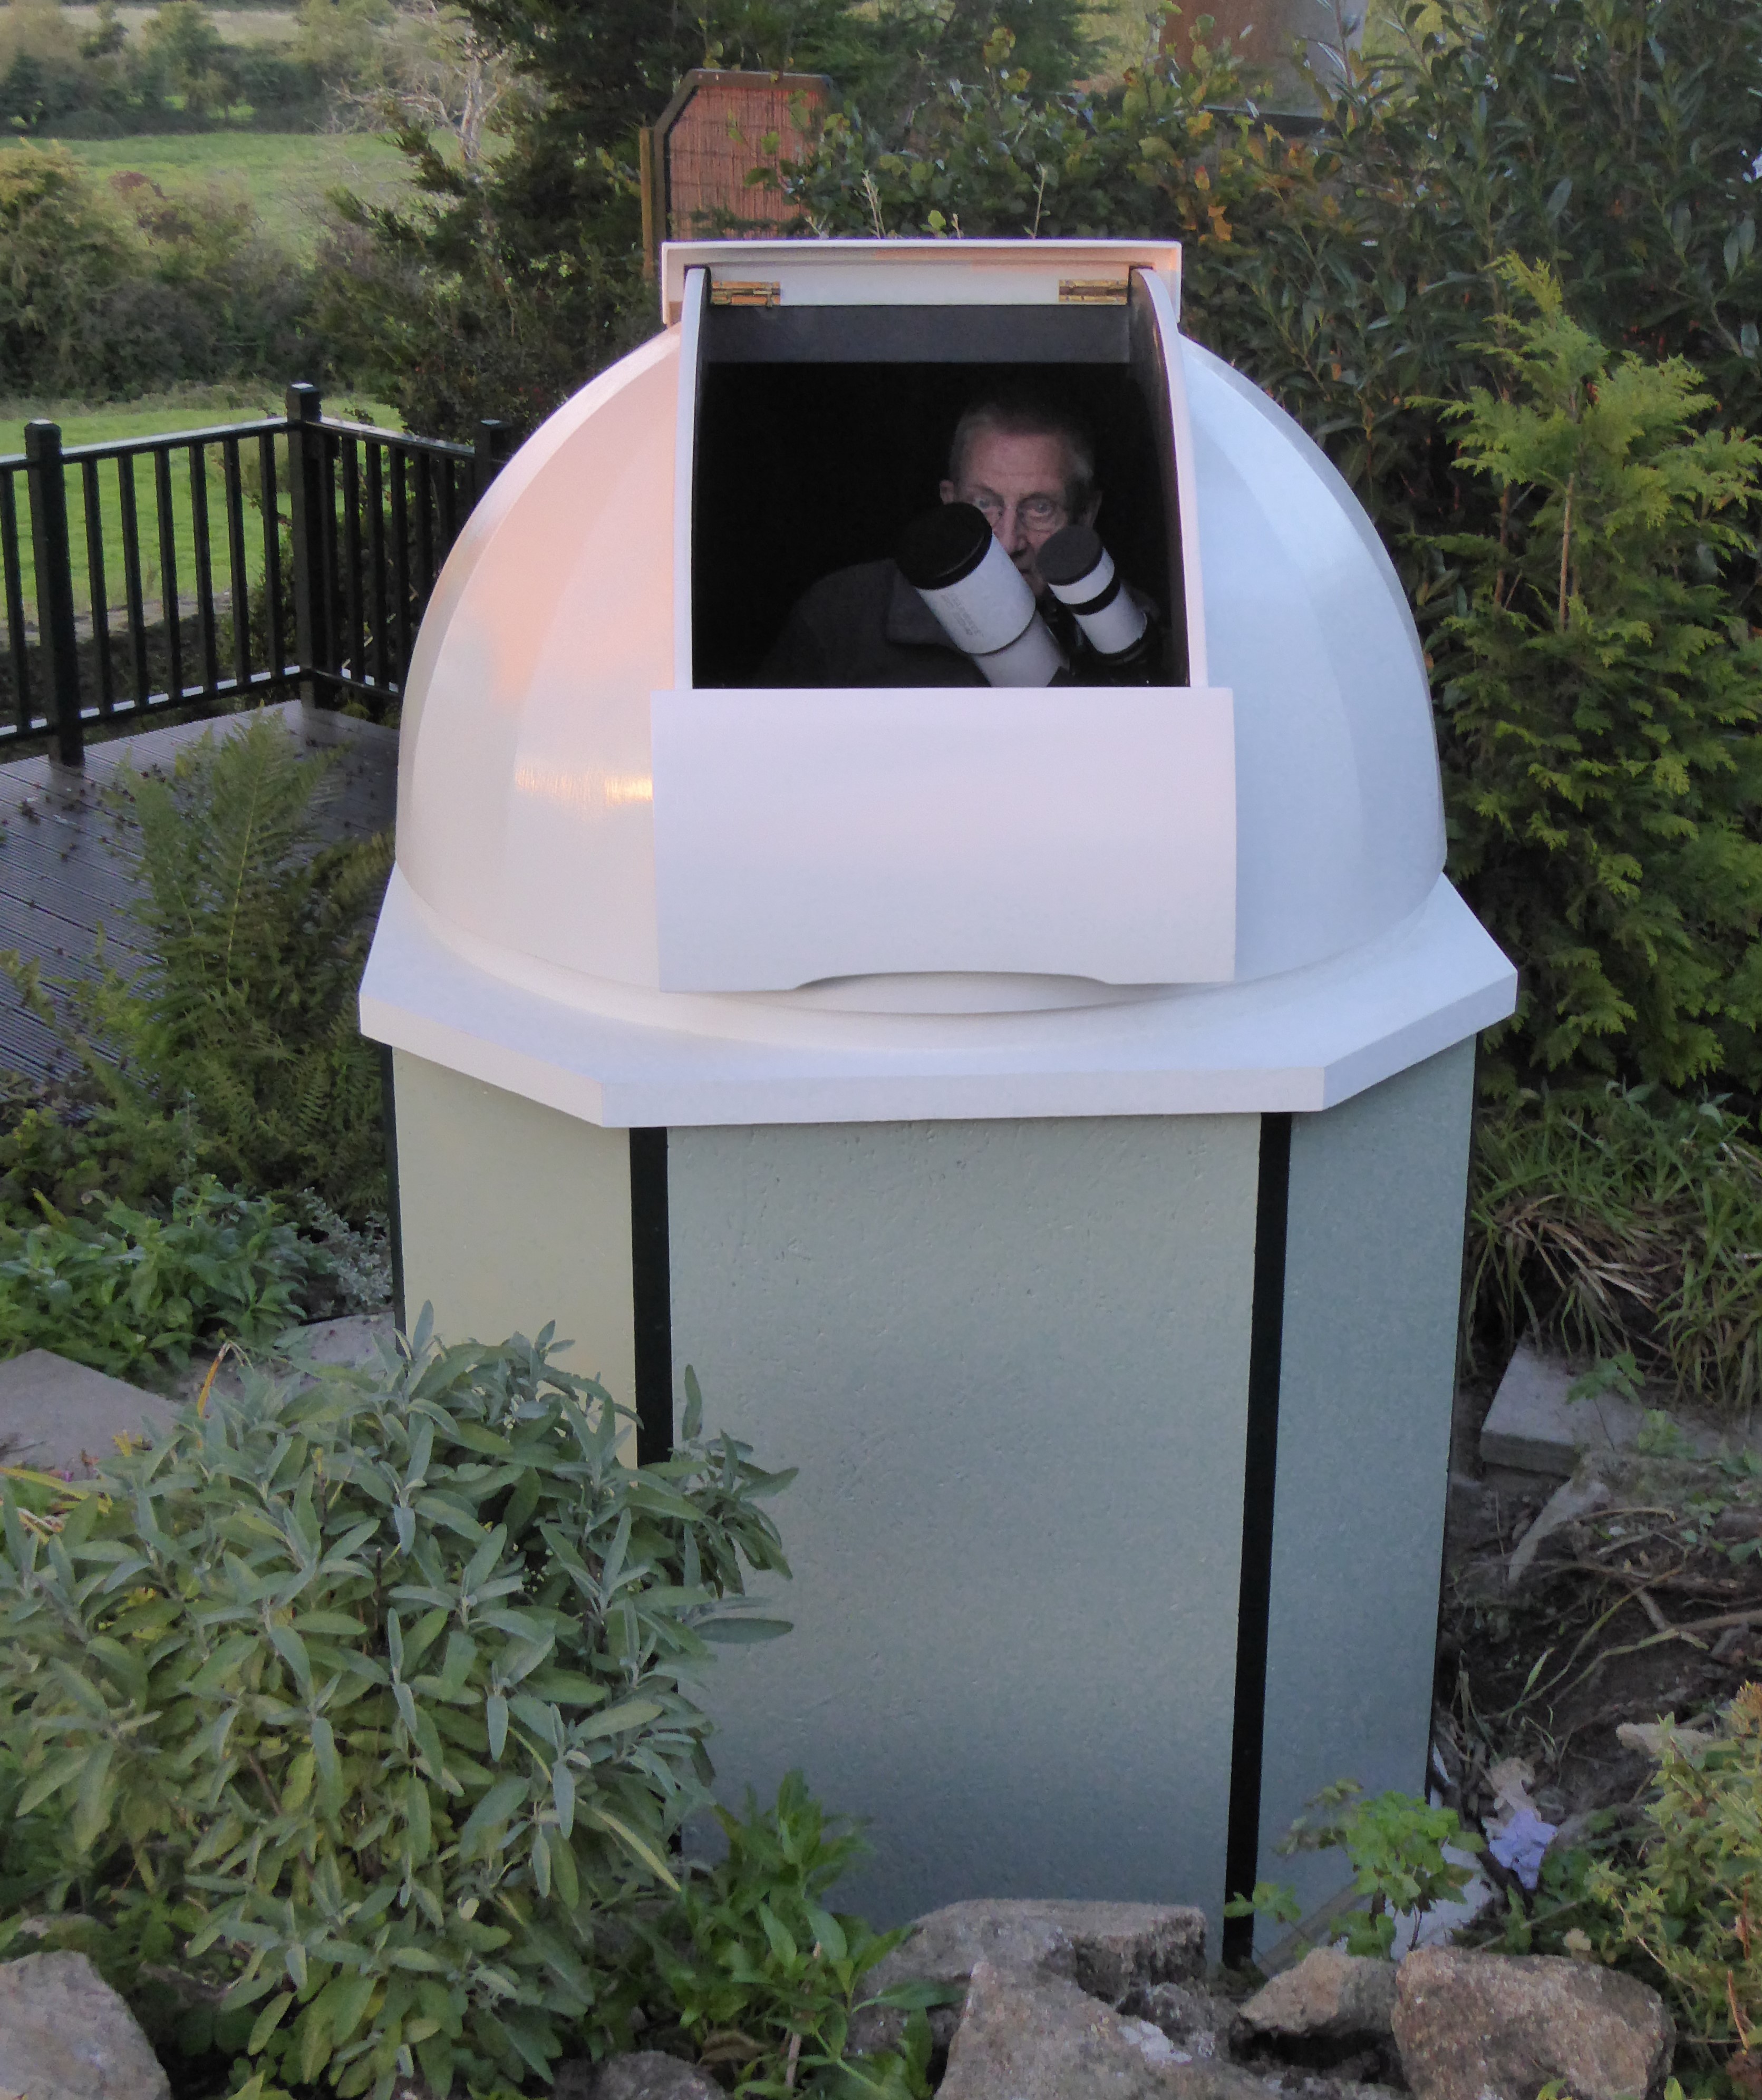 Mini Observatory for Astrophotography - DIY Observatories - Stargazers Lounge